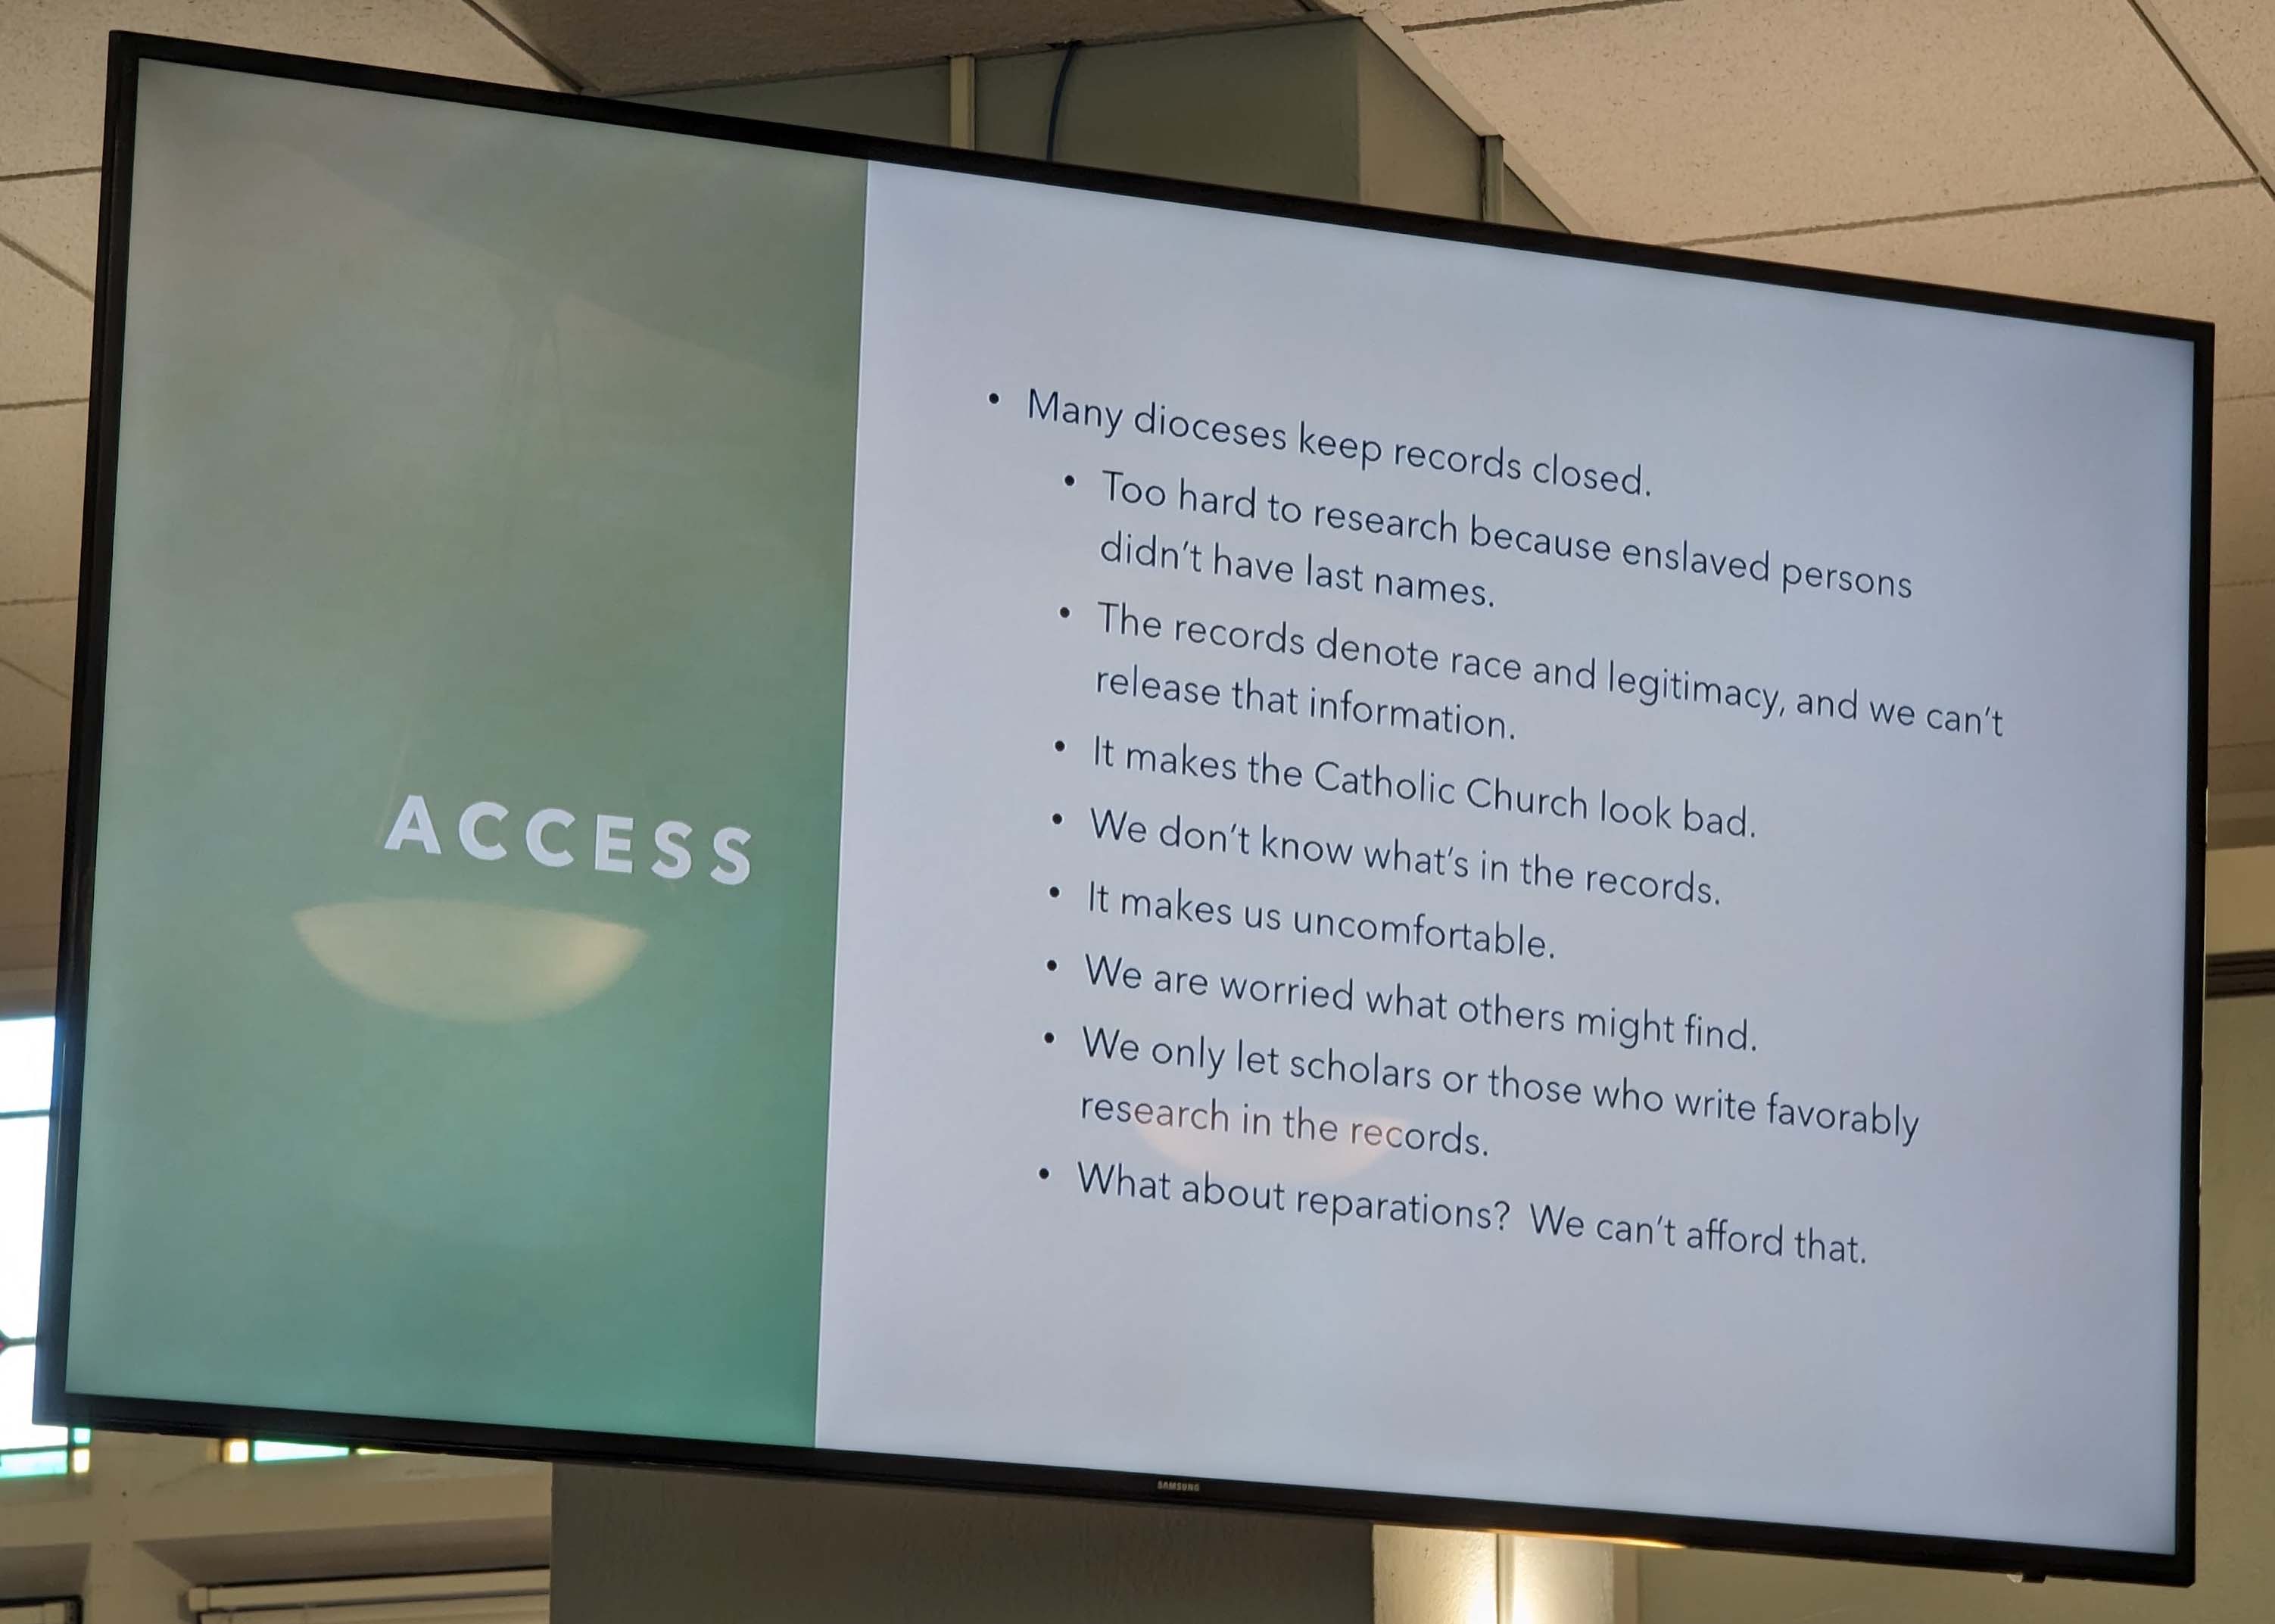 A slide during a presentation at the Catholic Religious Organizations Studying Slavery (CROSS) Conference, held Oct. 30-31 in St. Louis (Black Catholic Messenger/Nate Tinner-Williams)